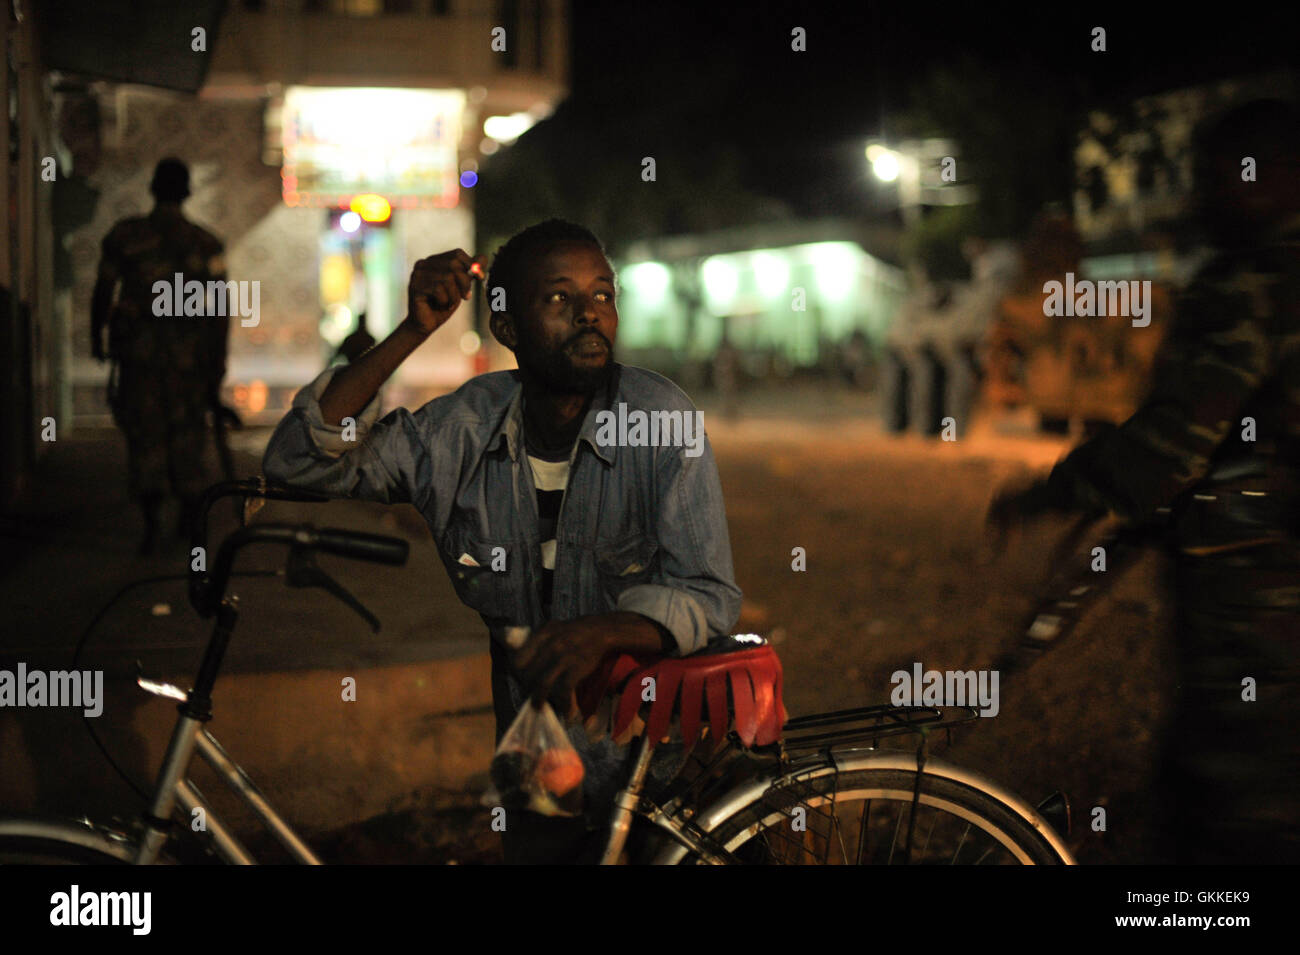 A Somali man smokes a cigarette while Ethiopian soldiers, as part of the African Union Mission in Somalia, conduct a night patrol through the city of Baidoa, Somalia, on June 22. AMISOM Photo / Tobin Jones Stock Photo